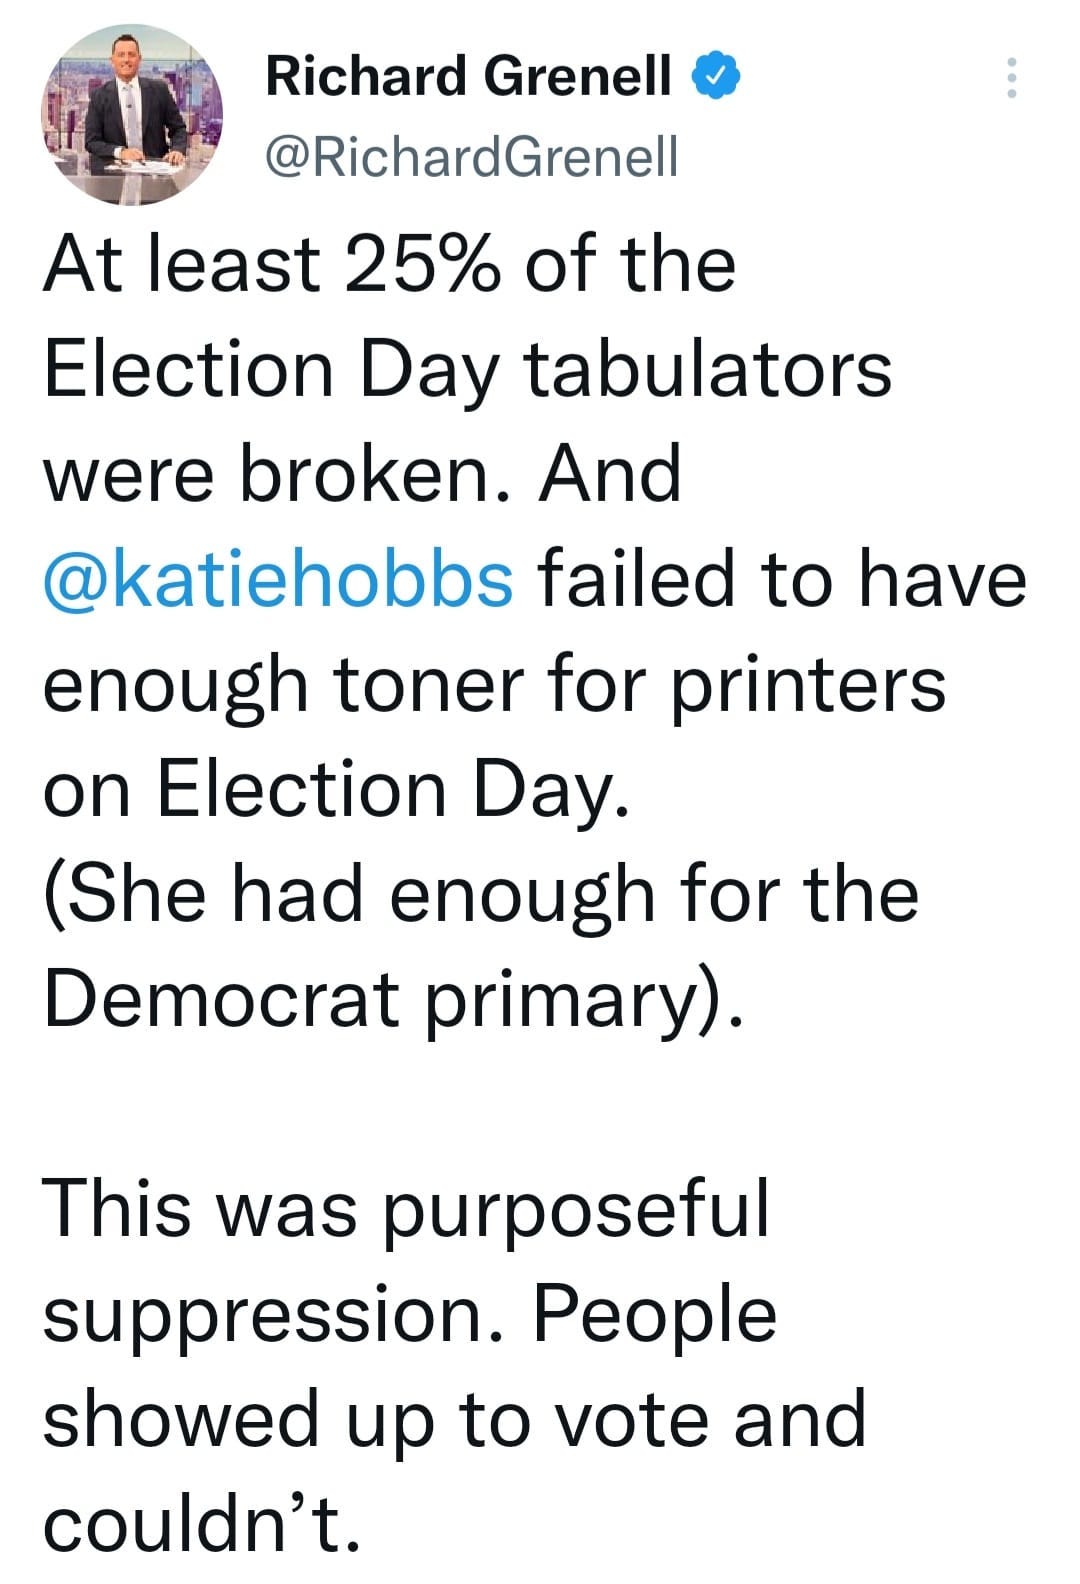 May be an image of 1 person and text that says 'Richard Grenell @RichardGrenell At least 25% of the Election Day tabulators were broken. And @katiehobbs failed to have enough toner for printers on Election Day. (She had enough for the Democrat primary). This was purposeful suppression. People showed up to vote and couldn't.'